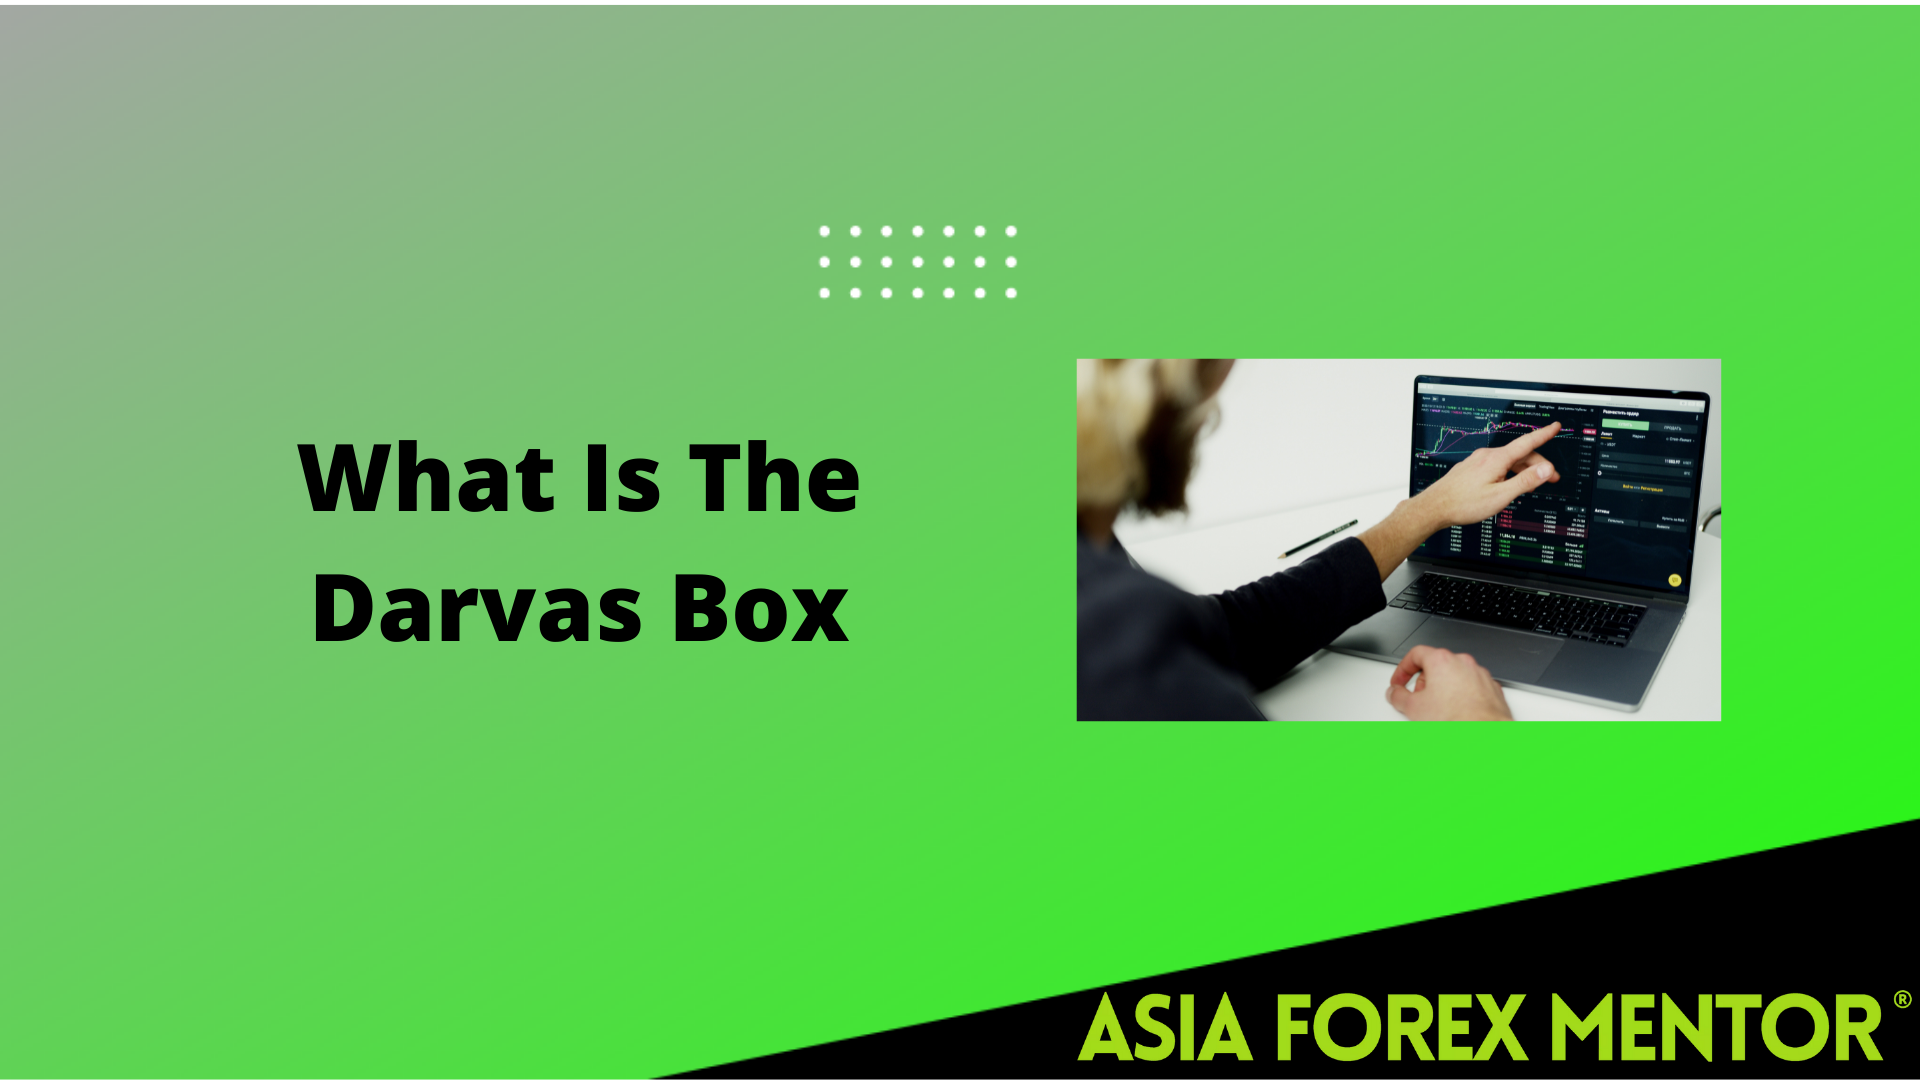 What Is The Darvas Box